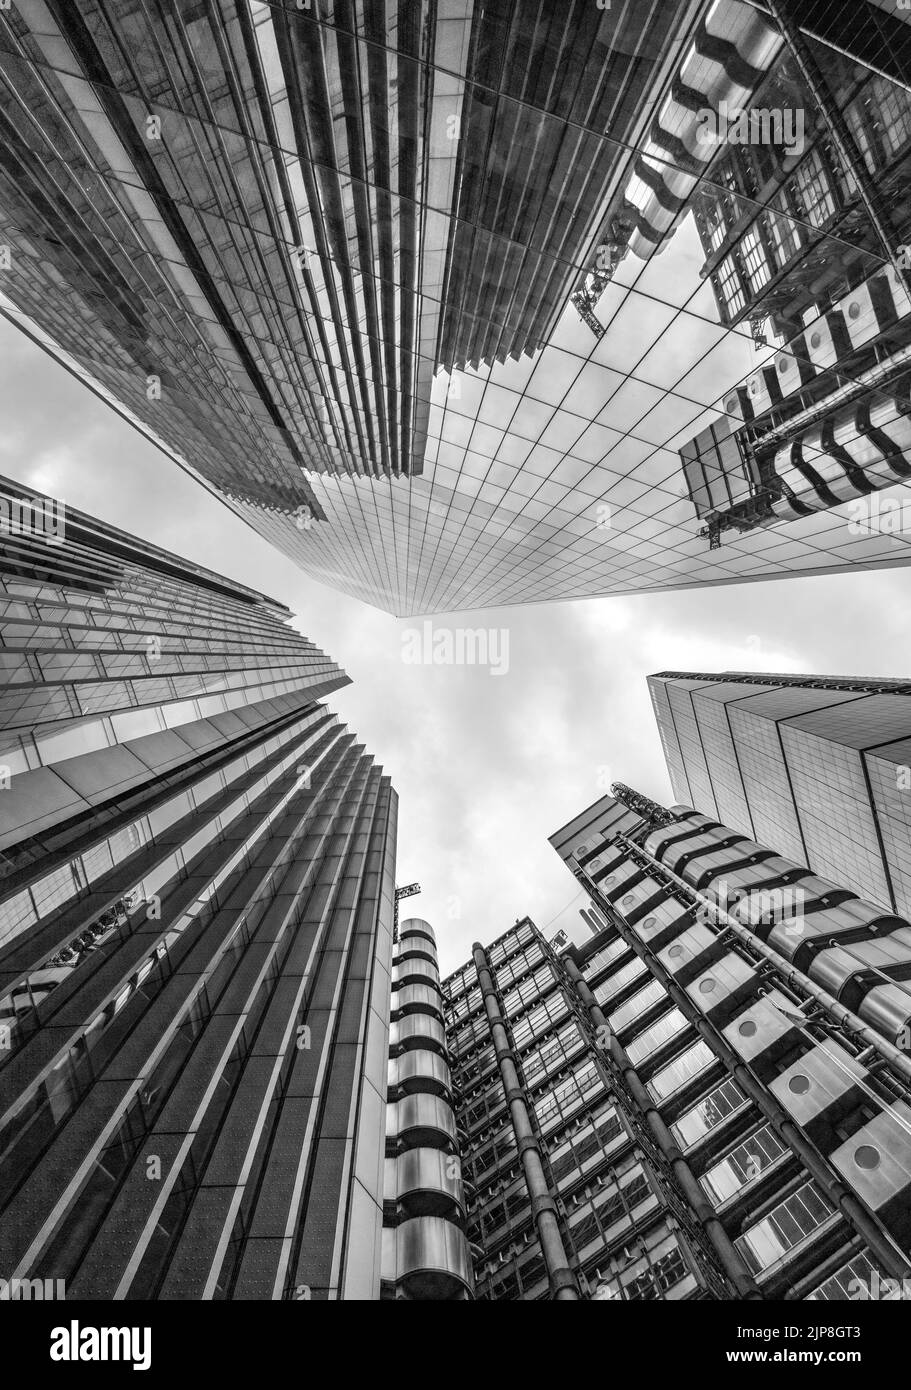 Looking Up at Tall Buildings London Stock Photo